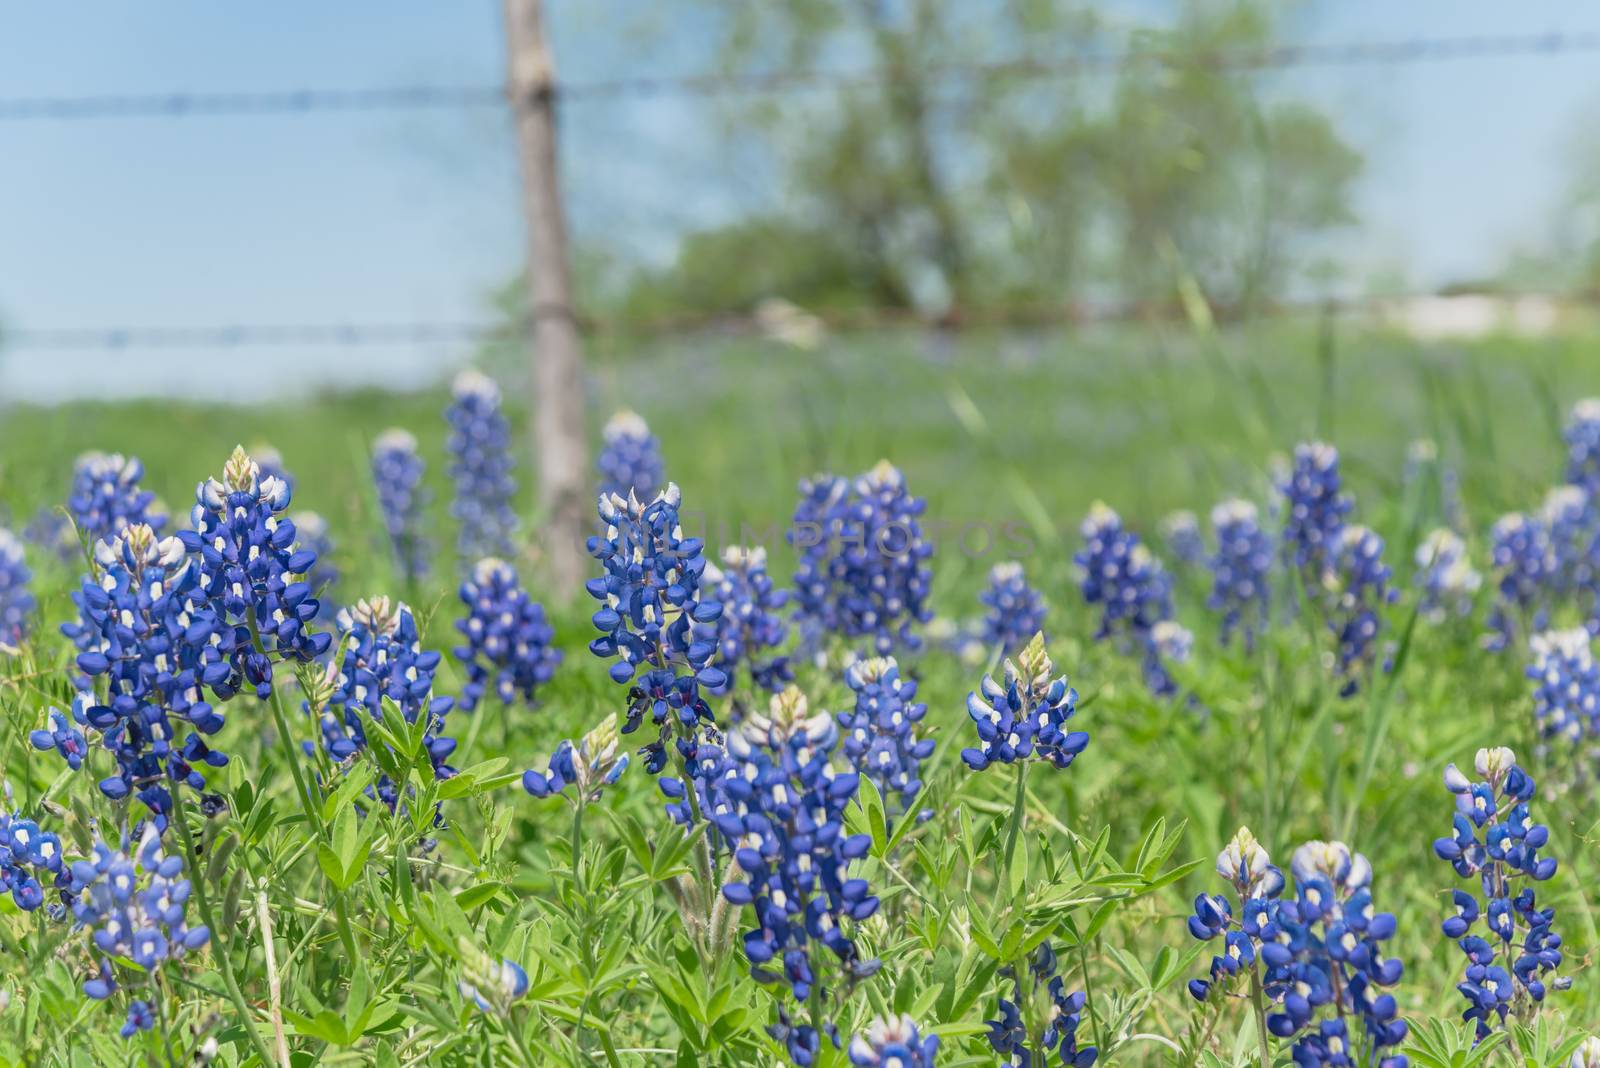 Close-up selective focus of Bluebonnet wildflower blooming in countryside Bristol, Texas. Colorful state flower of Texas blossom with blurry farm barbed wire fence in background